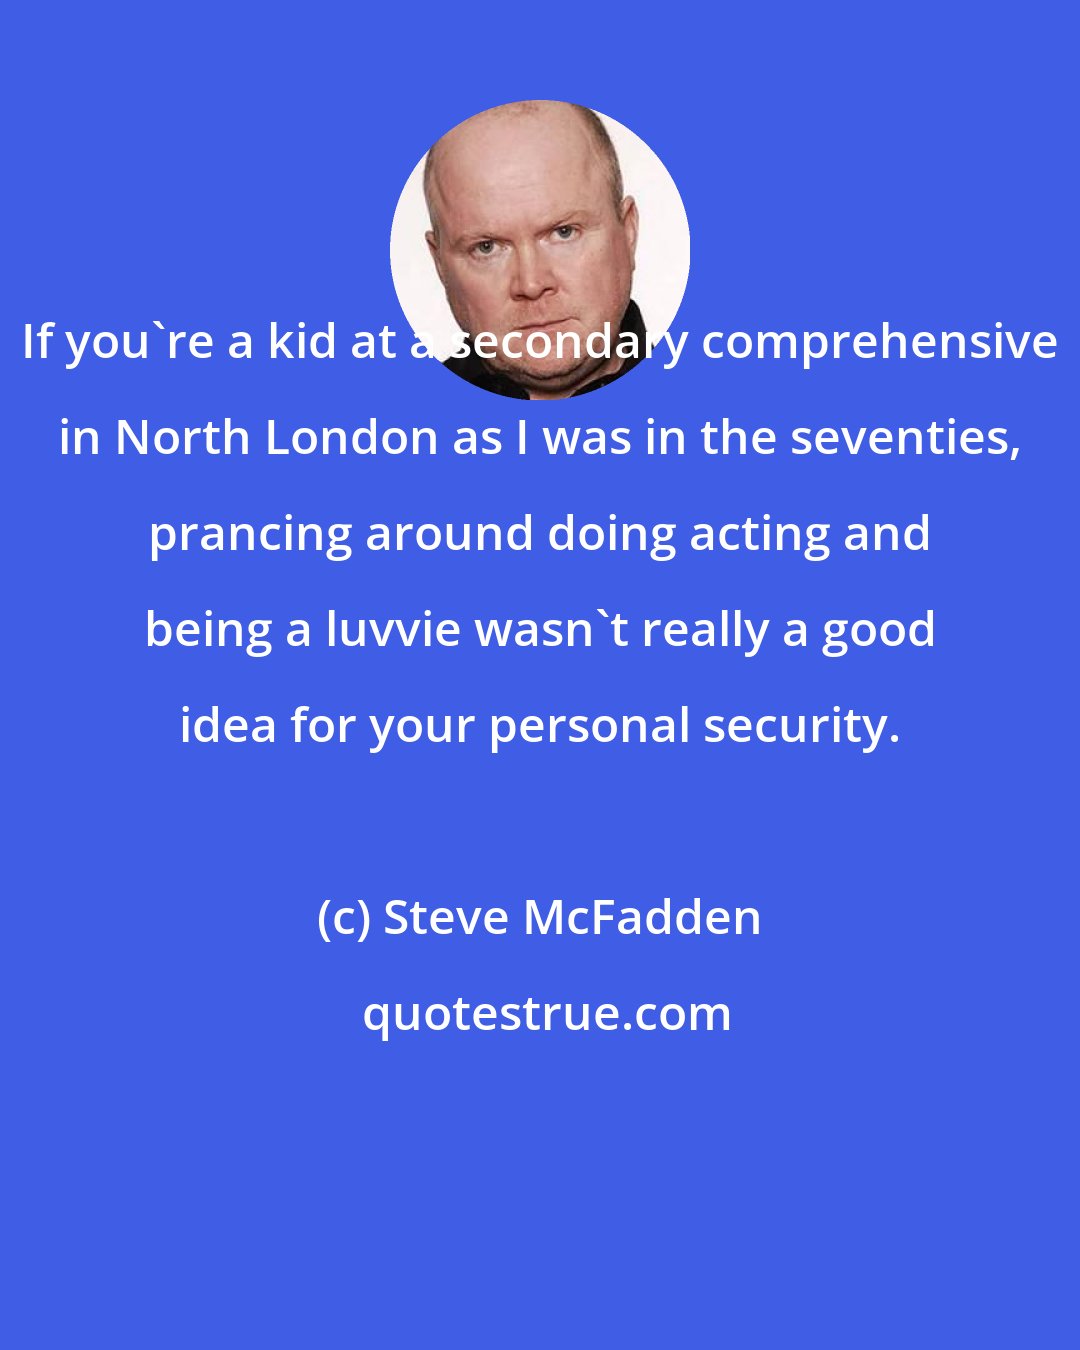 Steve McFadden: If you're a kid at a secondary comprehensive in North London as I was in the seventies, prancing around doing acting and being a luvvie wasn't really a good idea for your personal security.